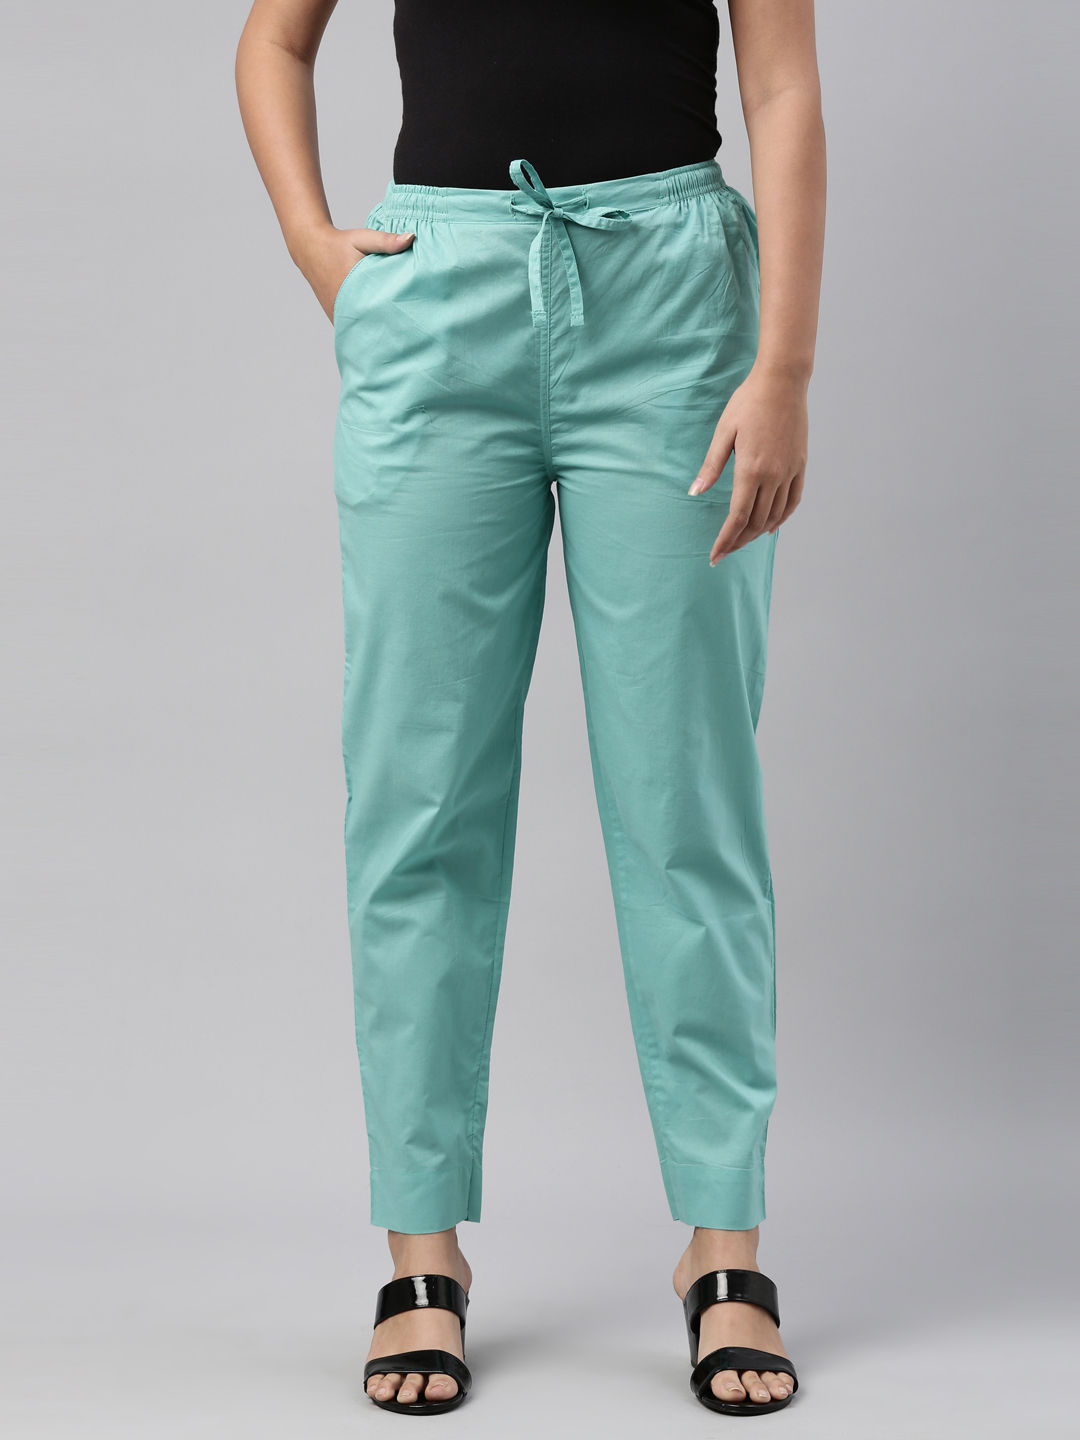 Go Colors Women Light Pista Solid Mid Rise Cotton Pants  Green Buy Go  Colors Women Light Pista Solid Mid Rise Cotton Pants  Green Online at Best  Price in India  Nykaa